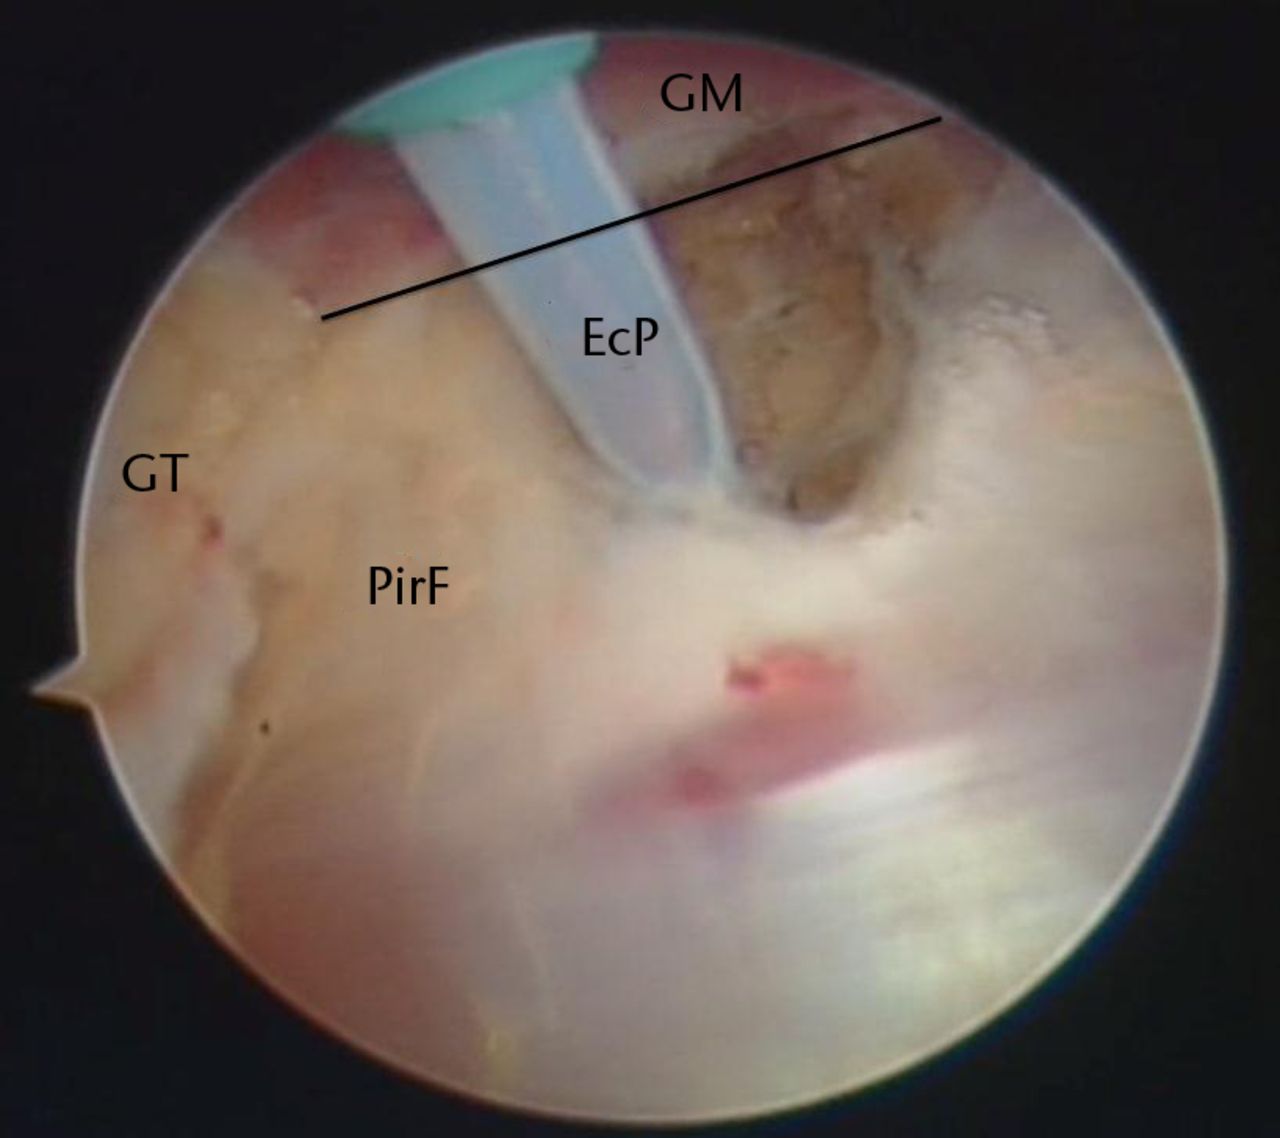 Figs. 3a - 3b 
          Endoscopic release of the piriformis
tendon and posterior hip capsule (GT, greater trochanter; Pr, endoscopic
probe; PirF, piriformis tendon; EcP, hooked coagulation probe).
        